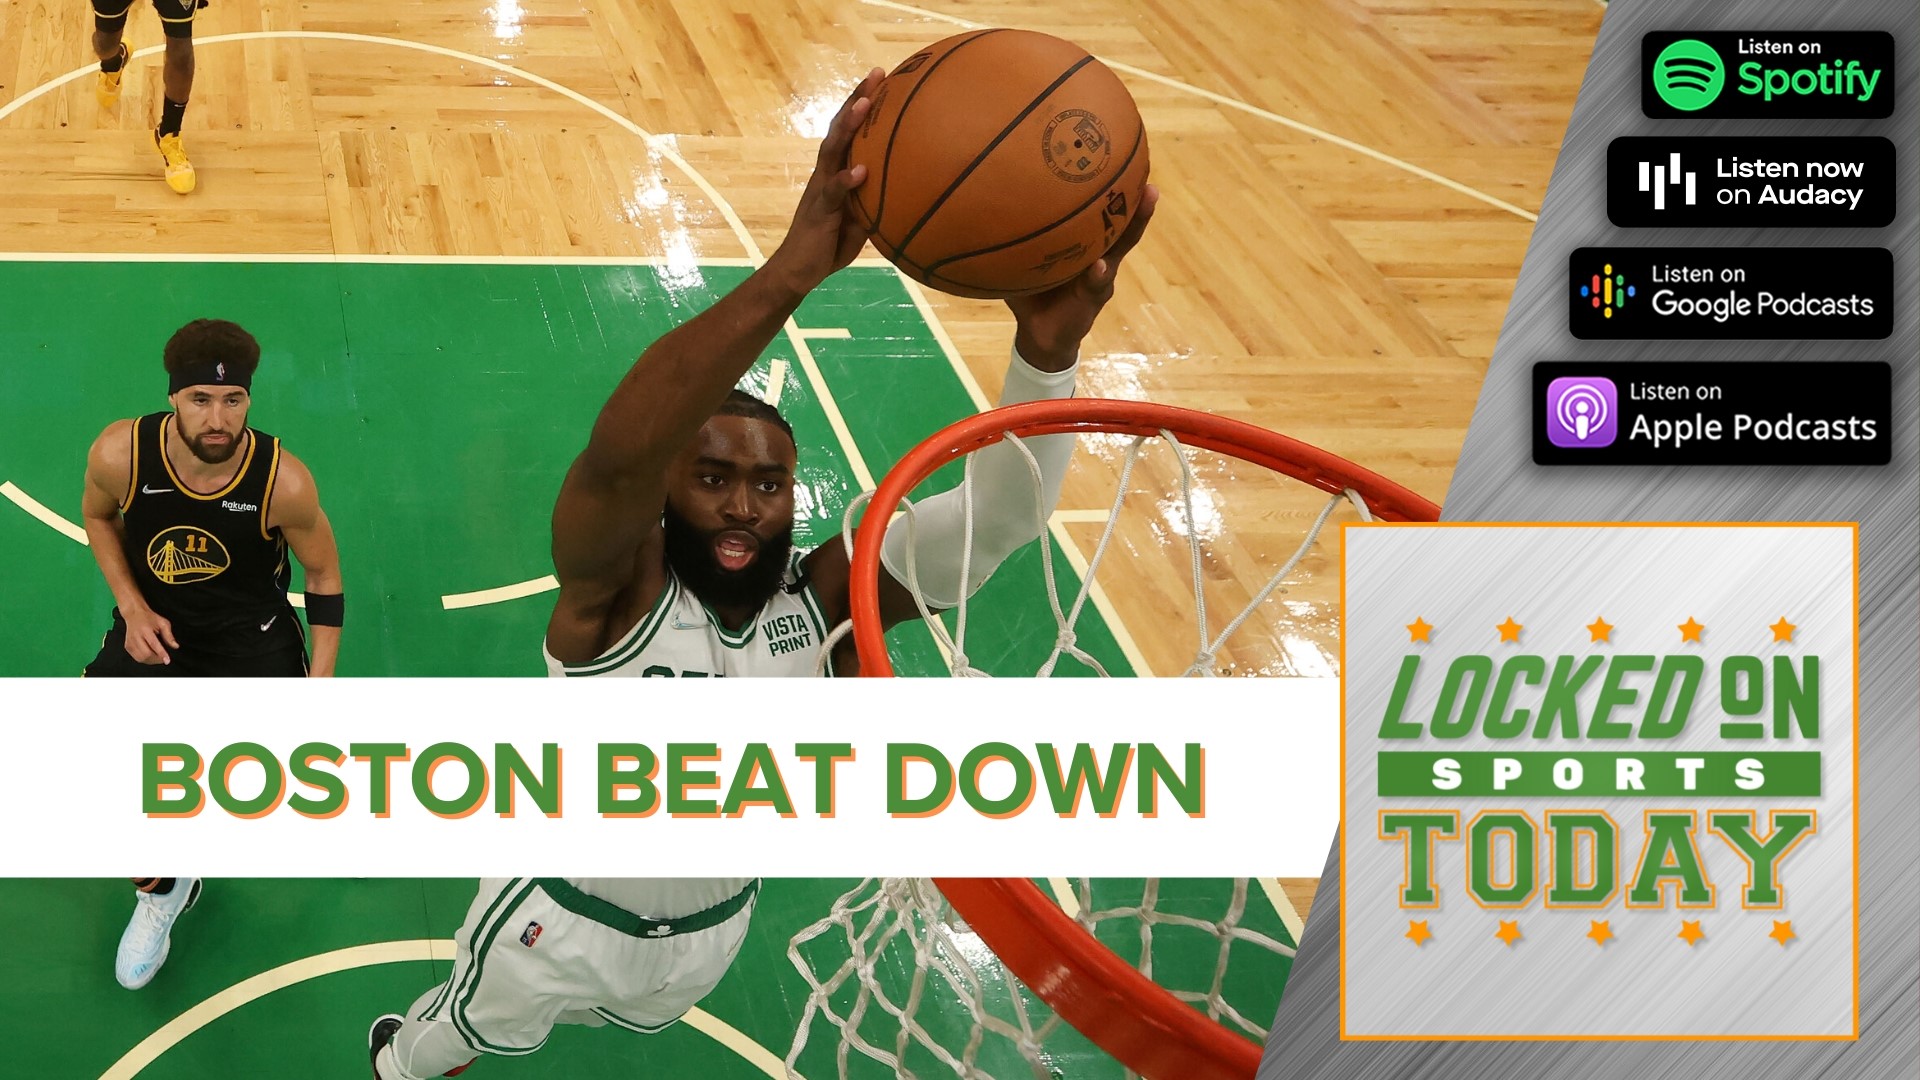 Discussing the day's top sports headlines from Boston Celtics winning Game 3 of the NBA playoffs to what players you might not see during NFL games this year.